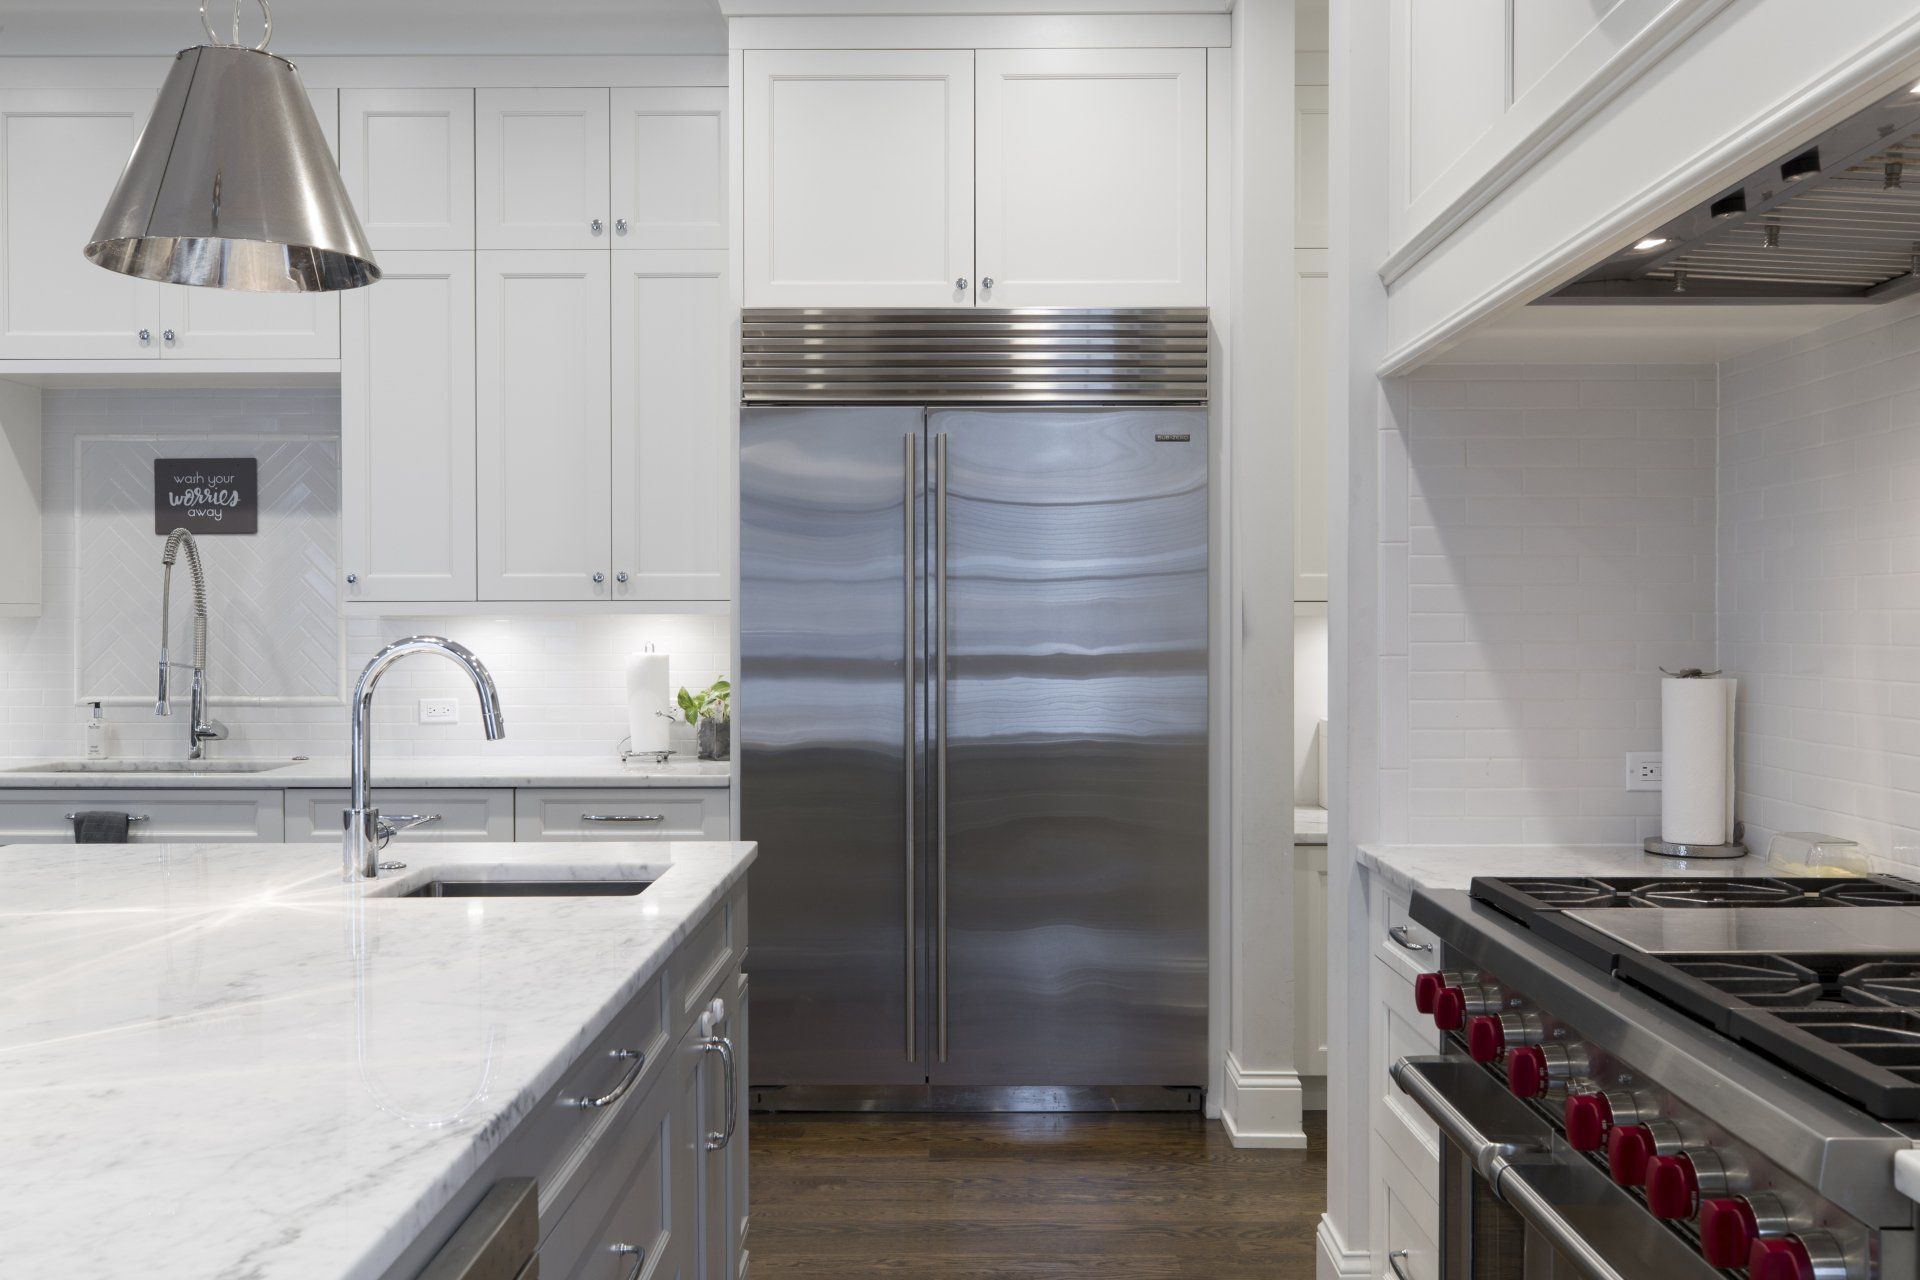 Upgrading to energy-efficient appliances can enhance the functionality of your kitchen and reduce your carbon footprint while improving the look of your space.